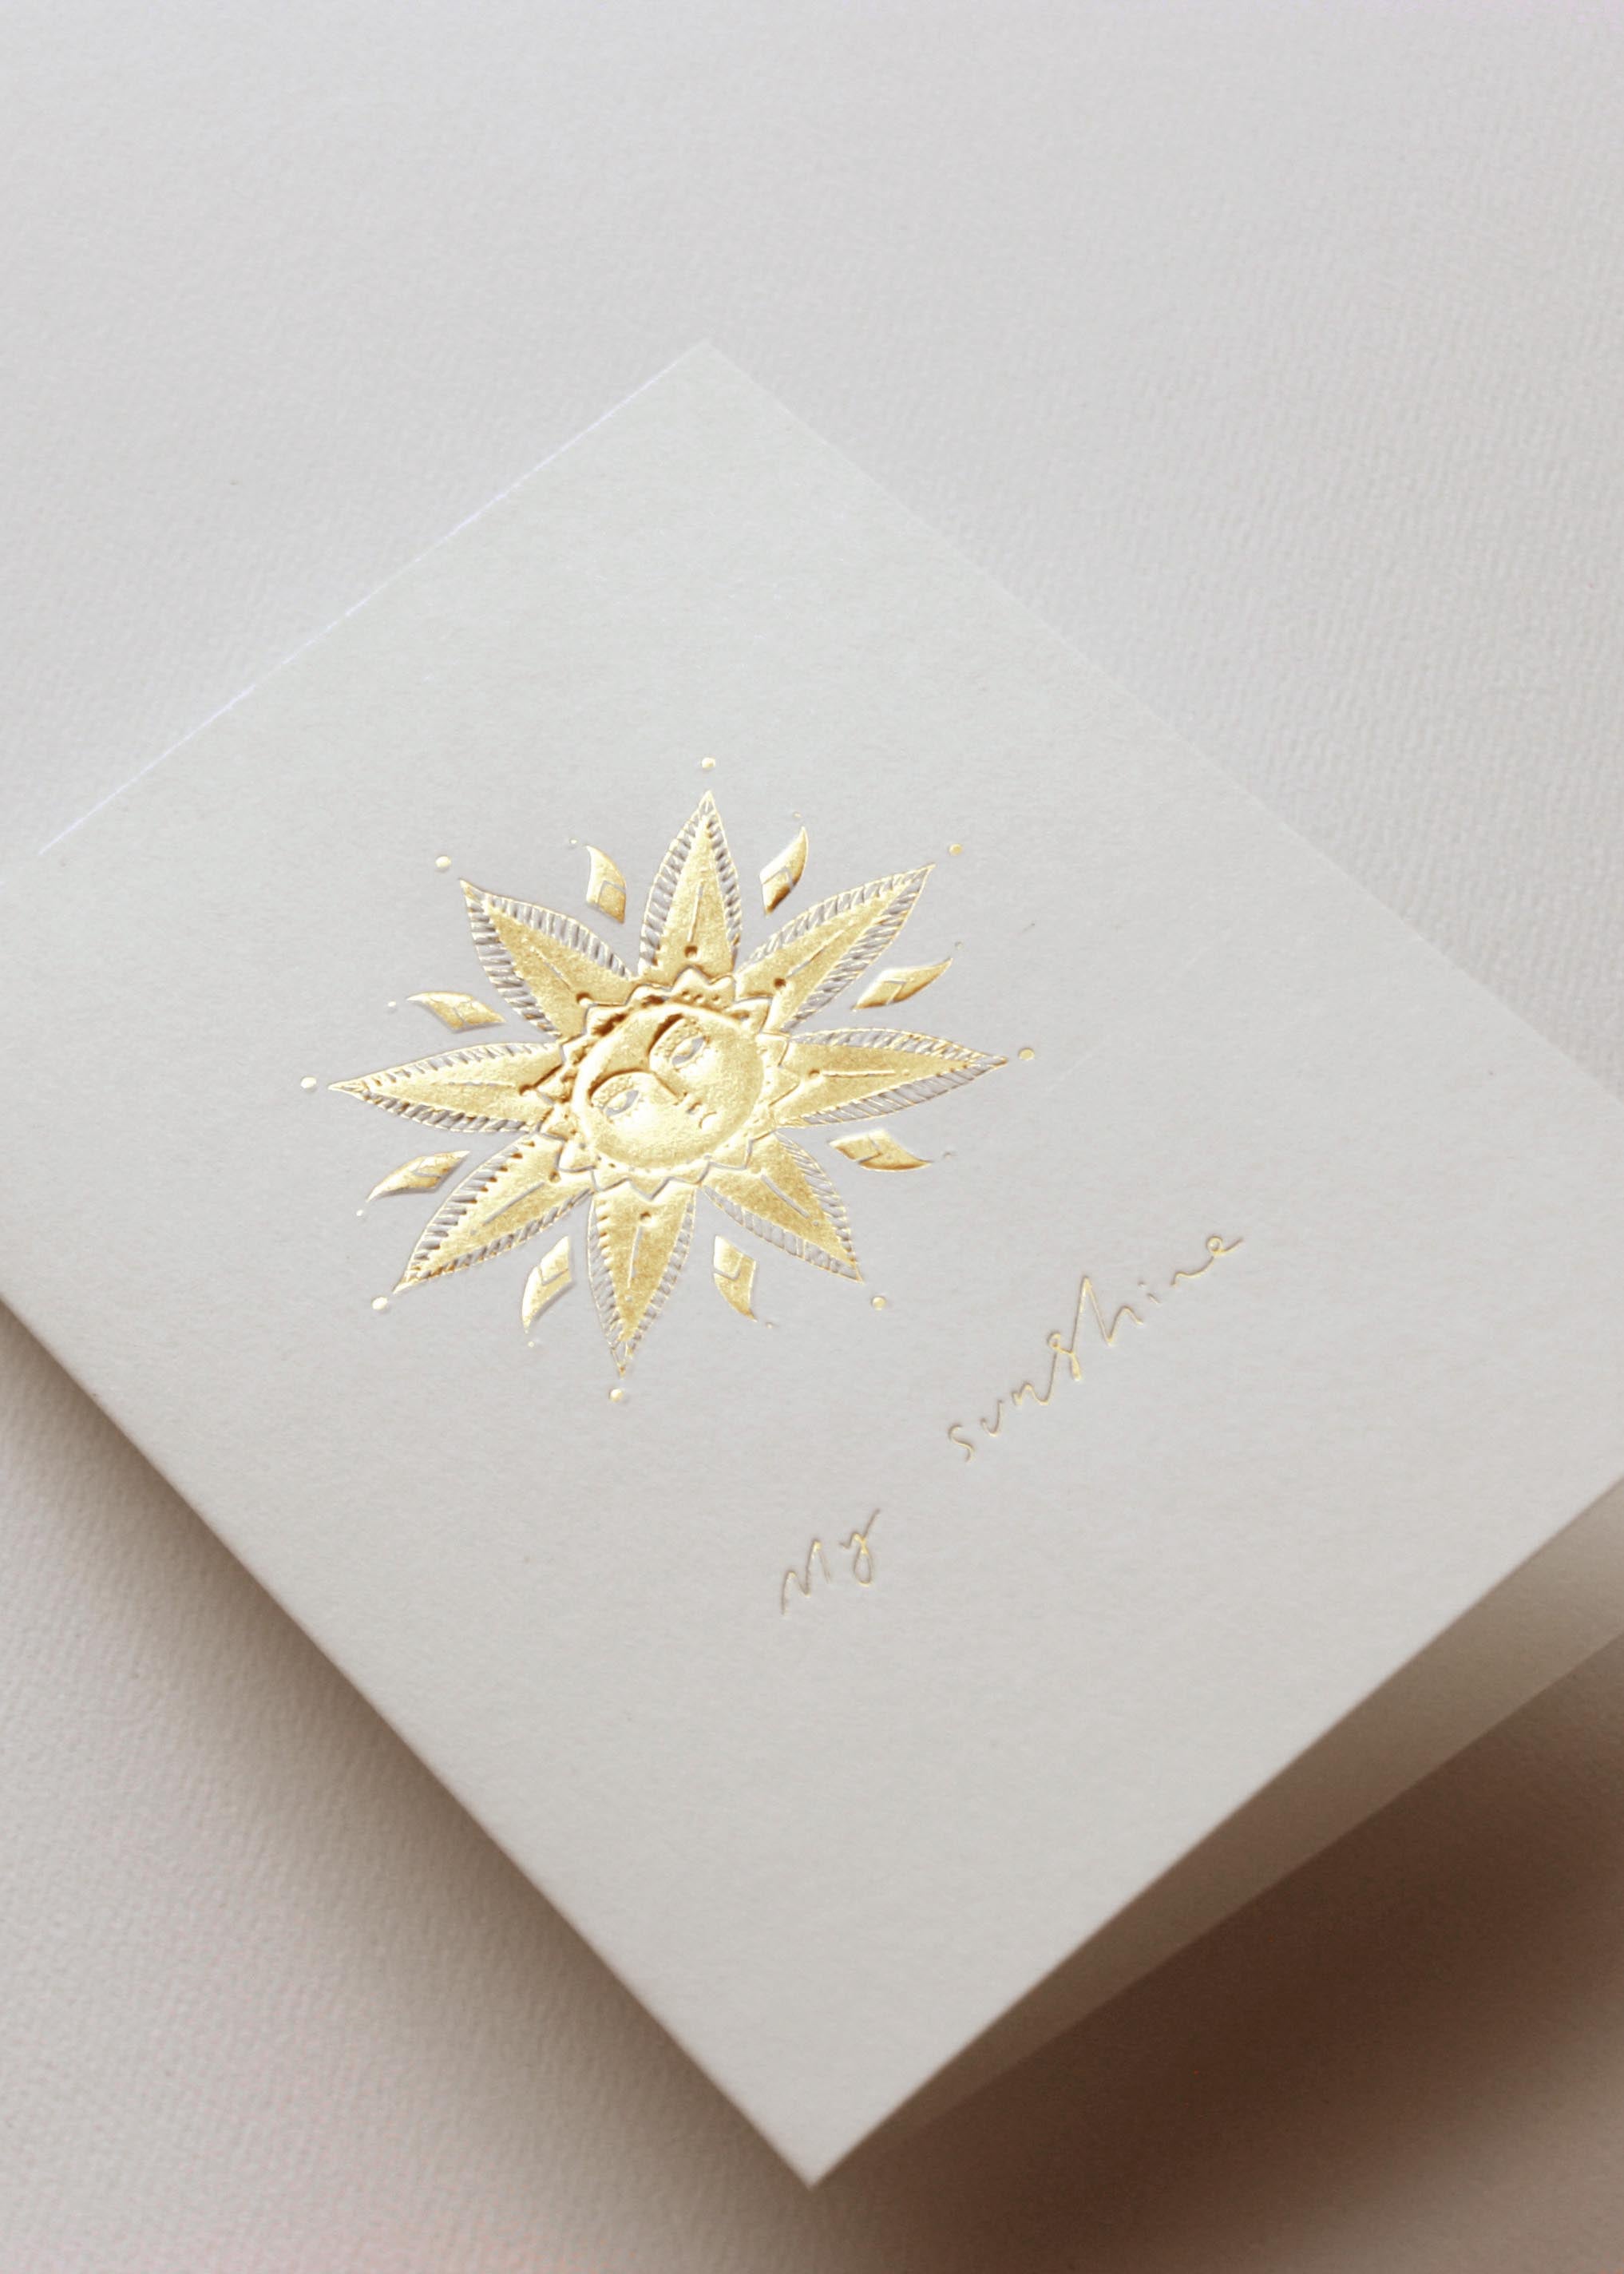 greeting cards diecut and hot foil printed with a sunshine, sunflower and hamsa design